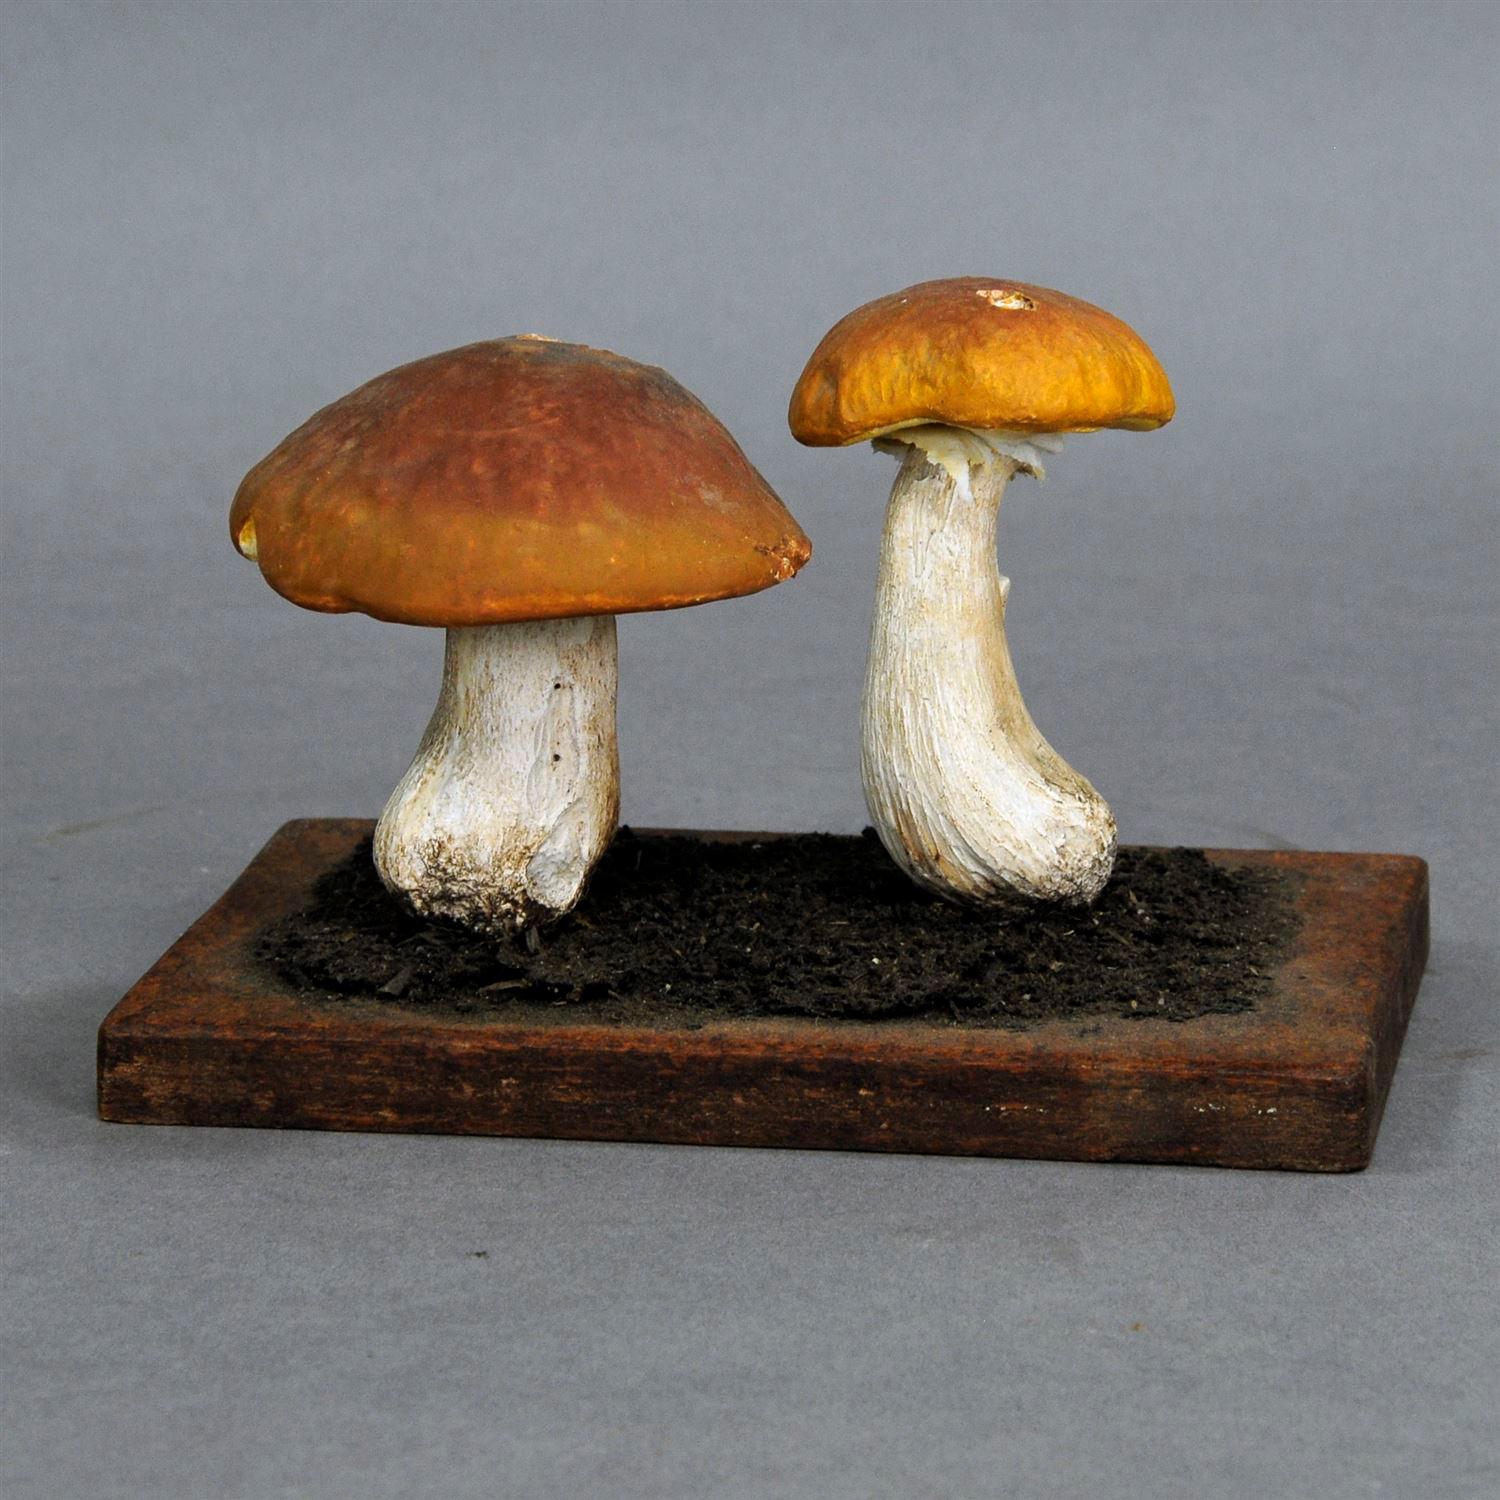 Three different mushroom school teching models or scientific specimen (porcini, birch polete, scarletina bolete). Used as teaching material in German schools, circa 1950. Wood and papier marchè.

Measures: Length 7.87